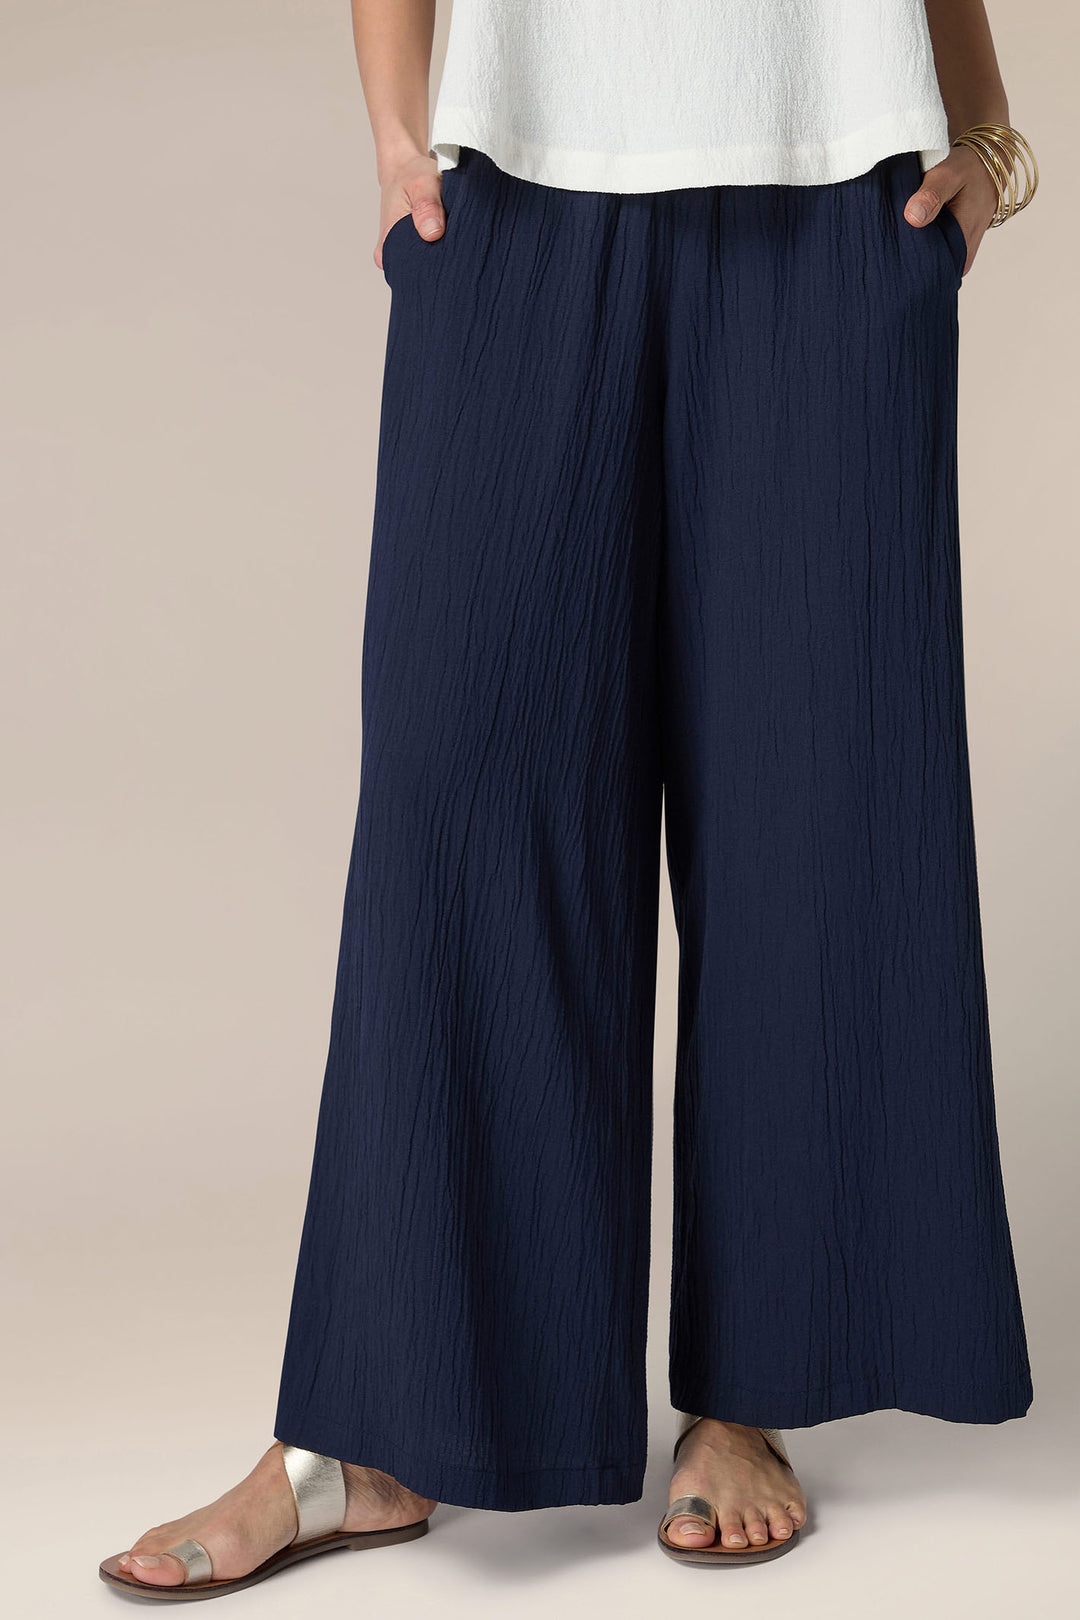 Sahara SPP5736-CSV Night Navy Crinkle Soft Viscose Wide Trouser - Experience Boutique